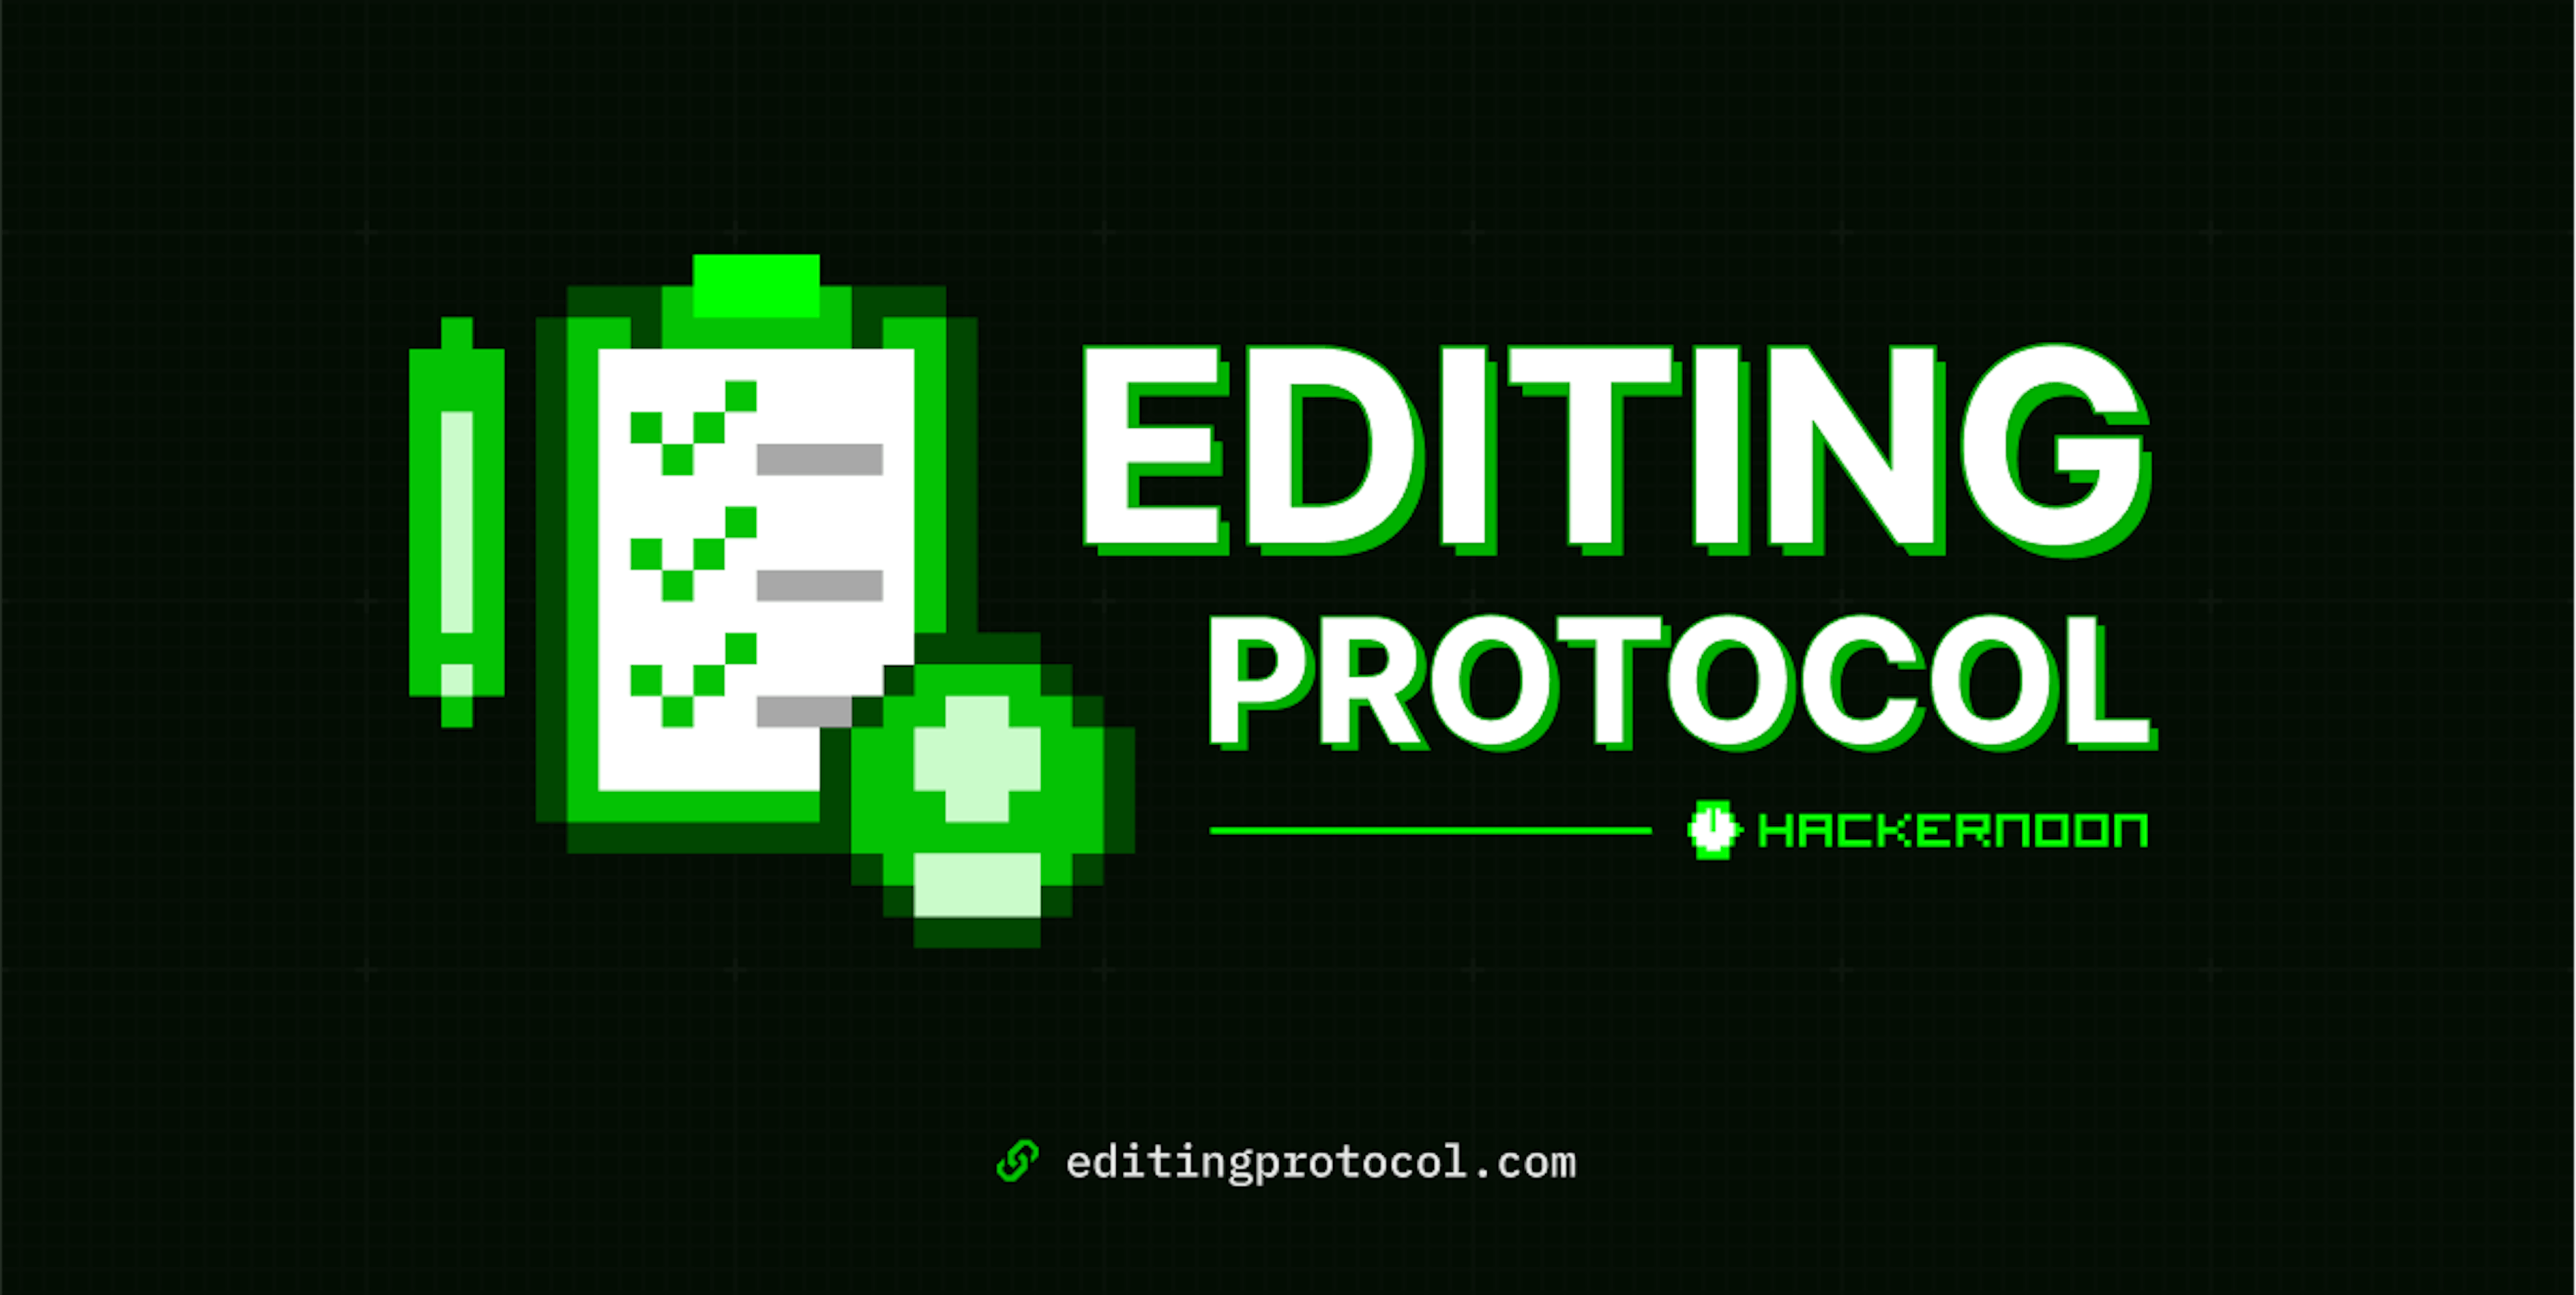 /the-hackernoon-editing-protocol feature image